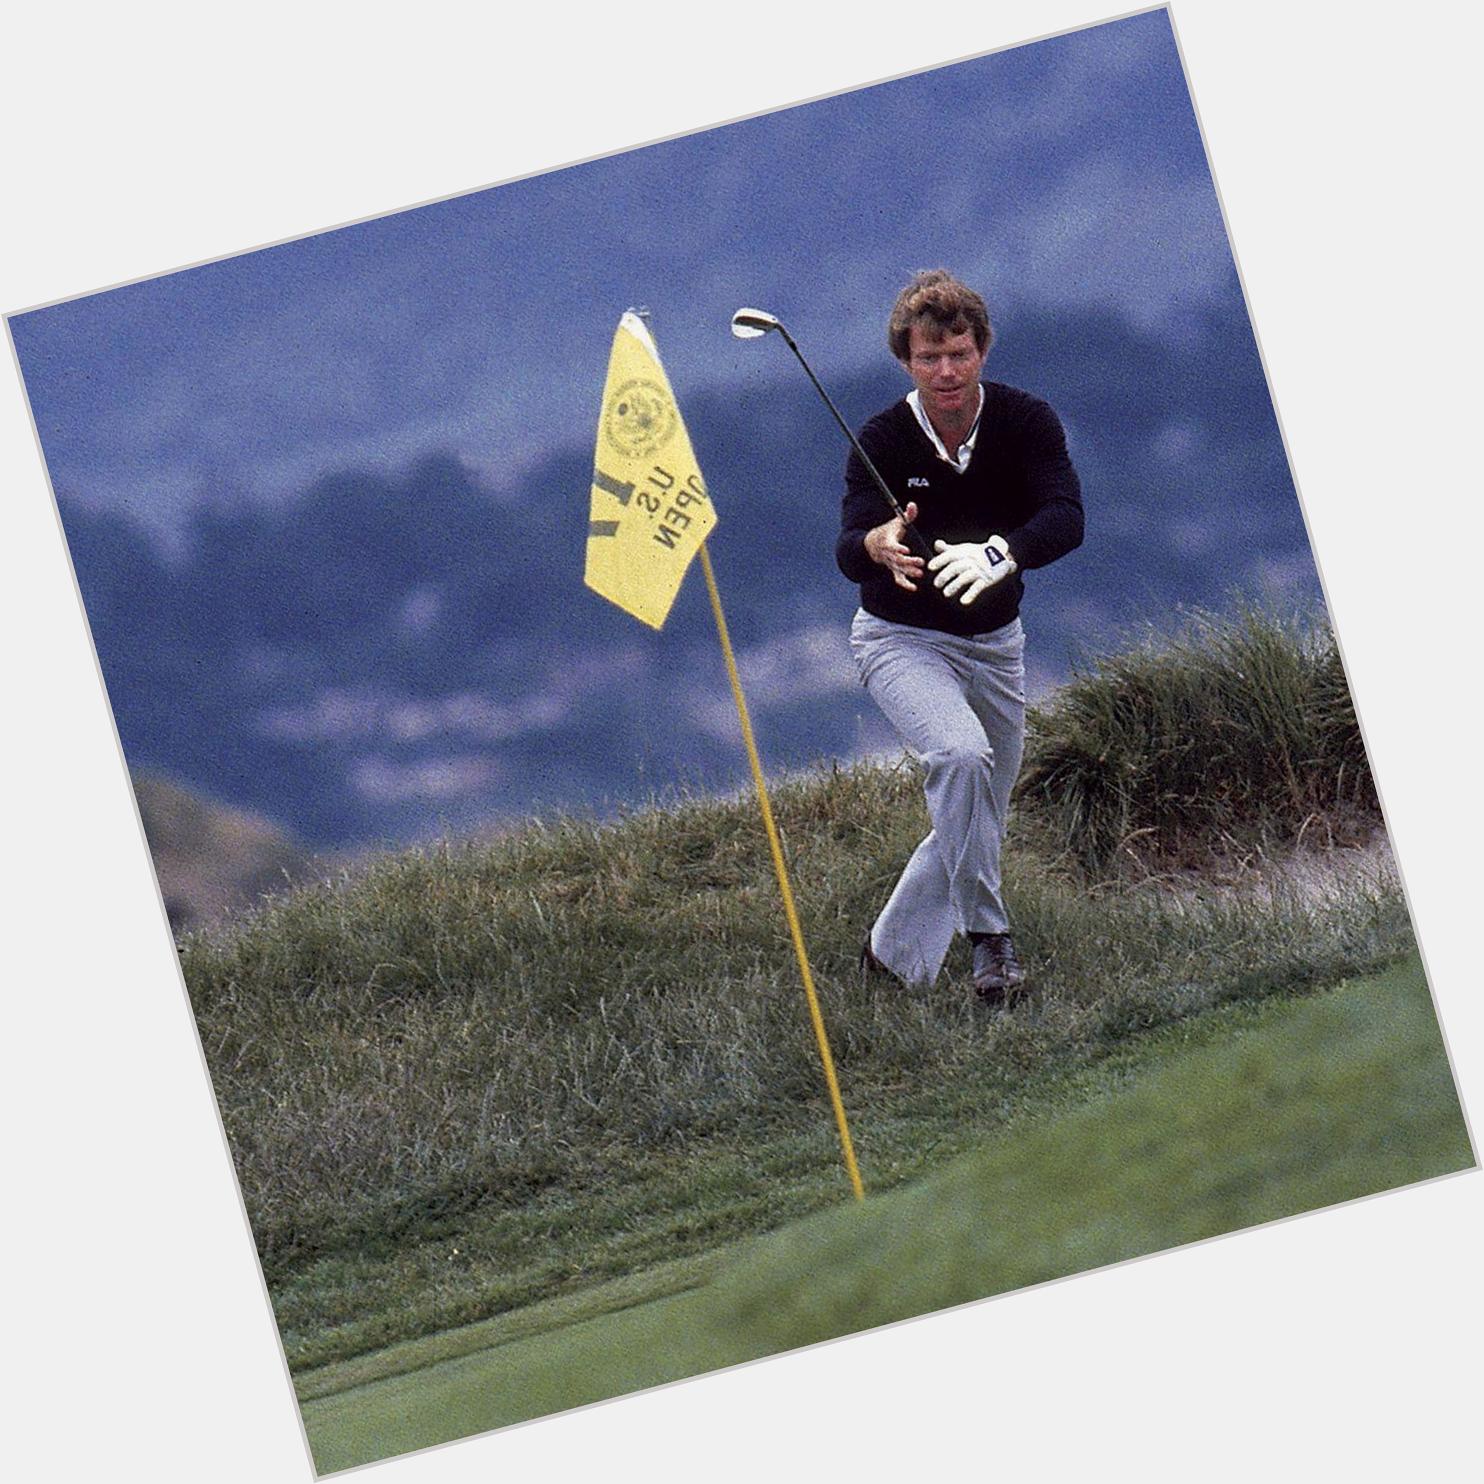 Happy Birthday to Our Ryder Cup Captain Tom Watson!!
September 4, 2014 